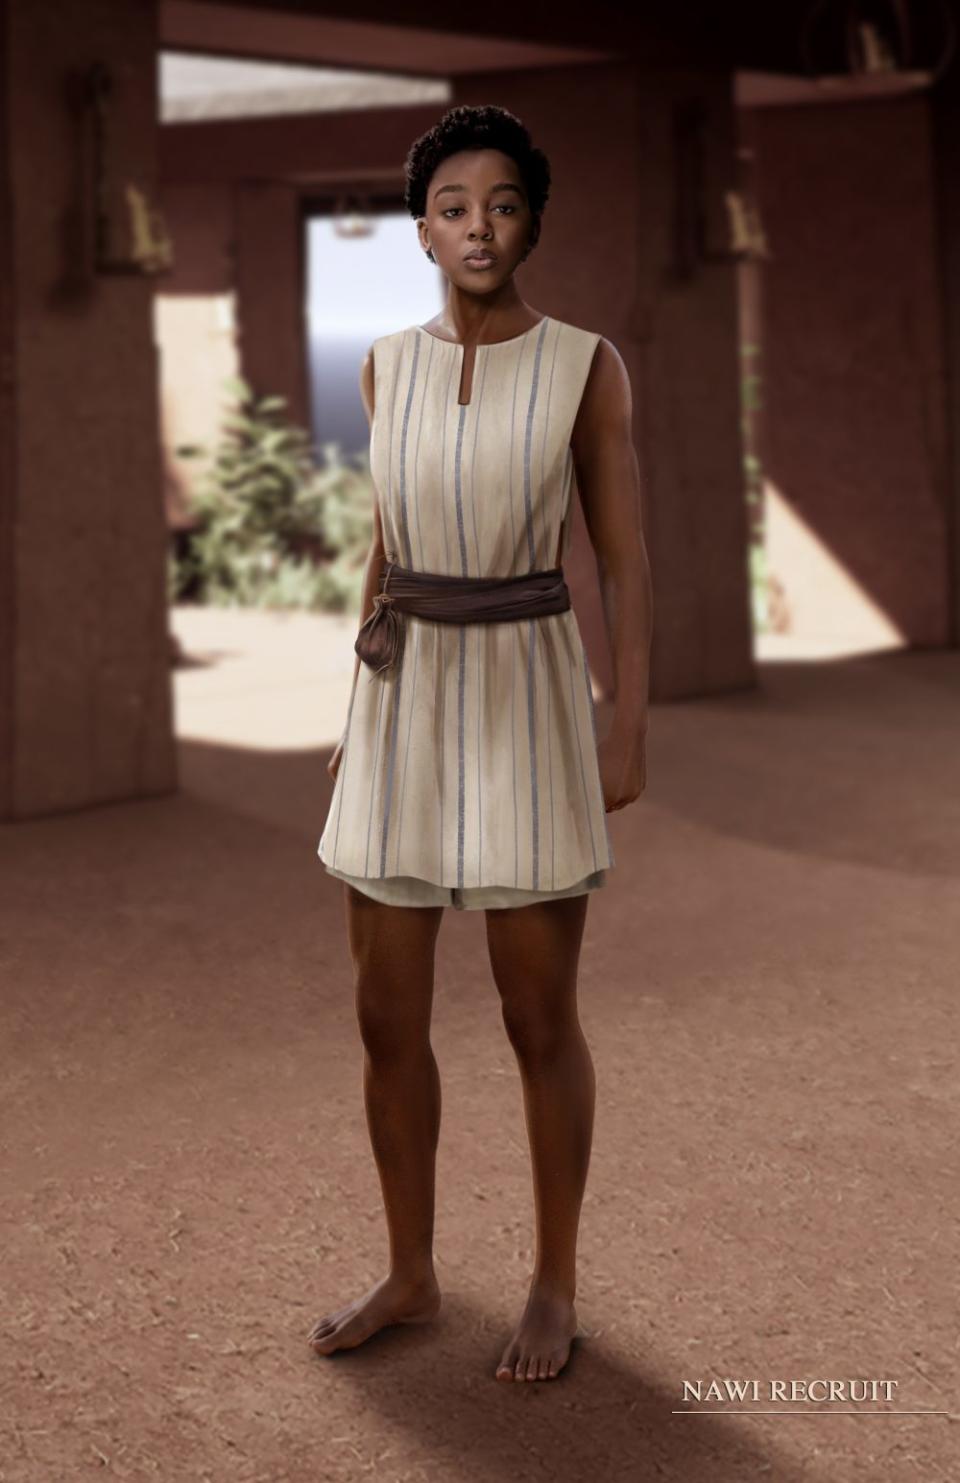 New palace recruit Nawi had a simple two-piece woven outfit.